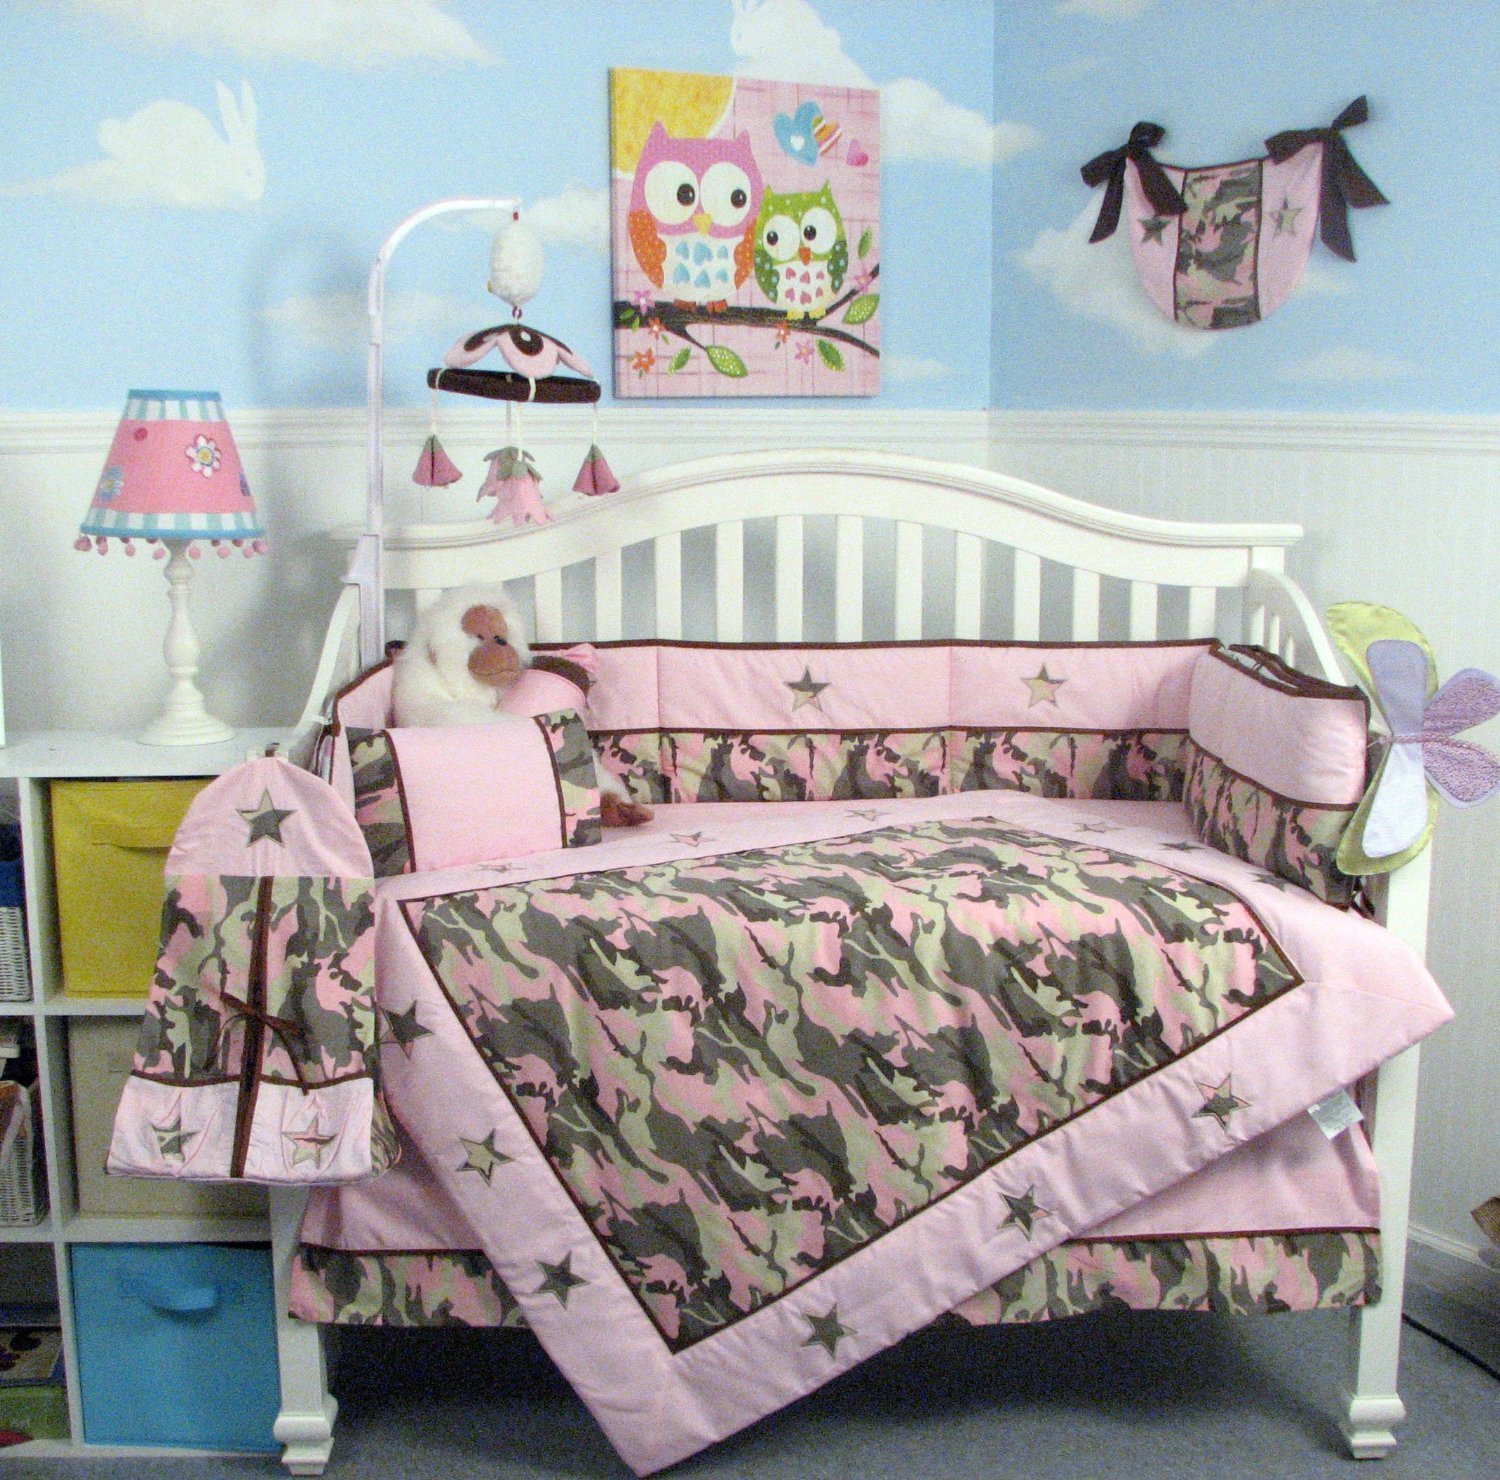 Camouflage Baby Decor
 21 Inspiring Ideas for Creating A Unique Crib With Custom